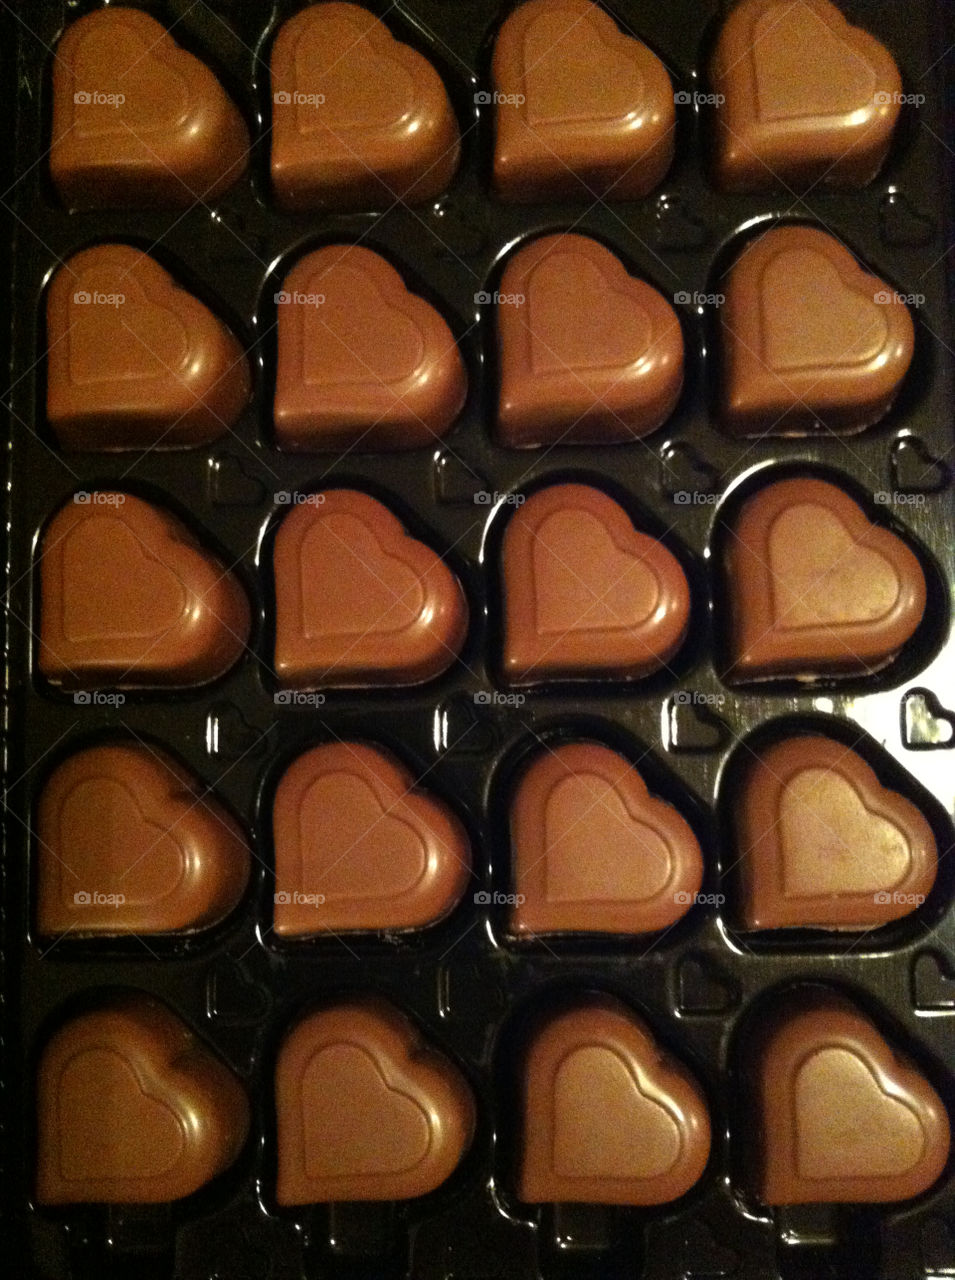 italy chocolate hearts province of vicenza by miamania